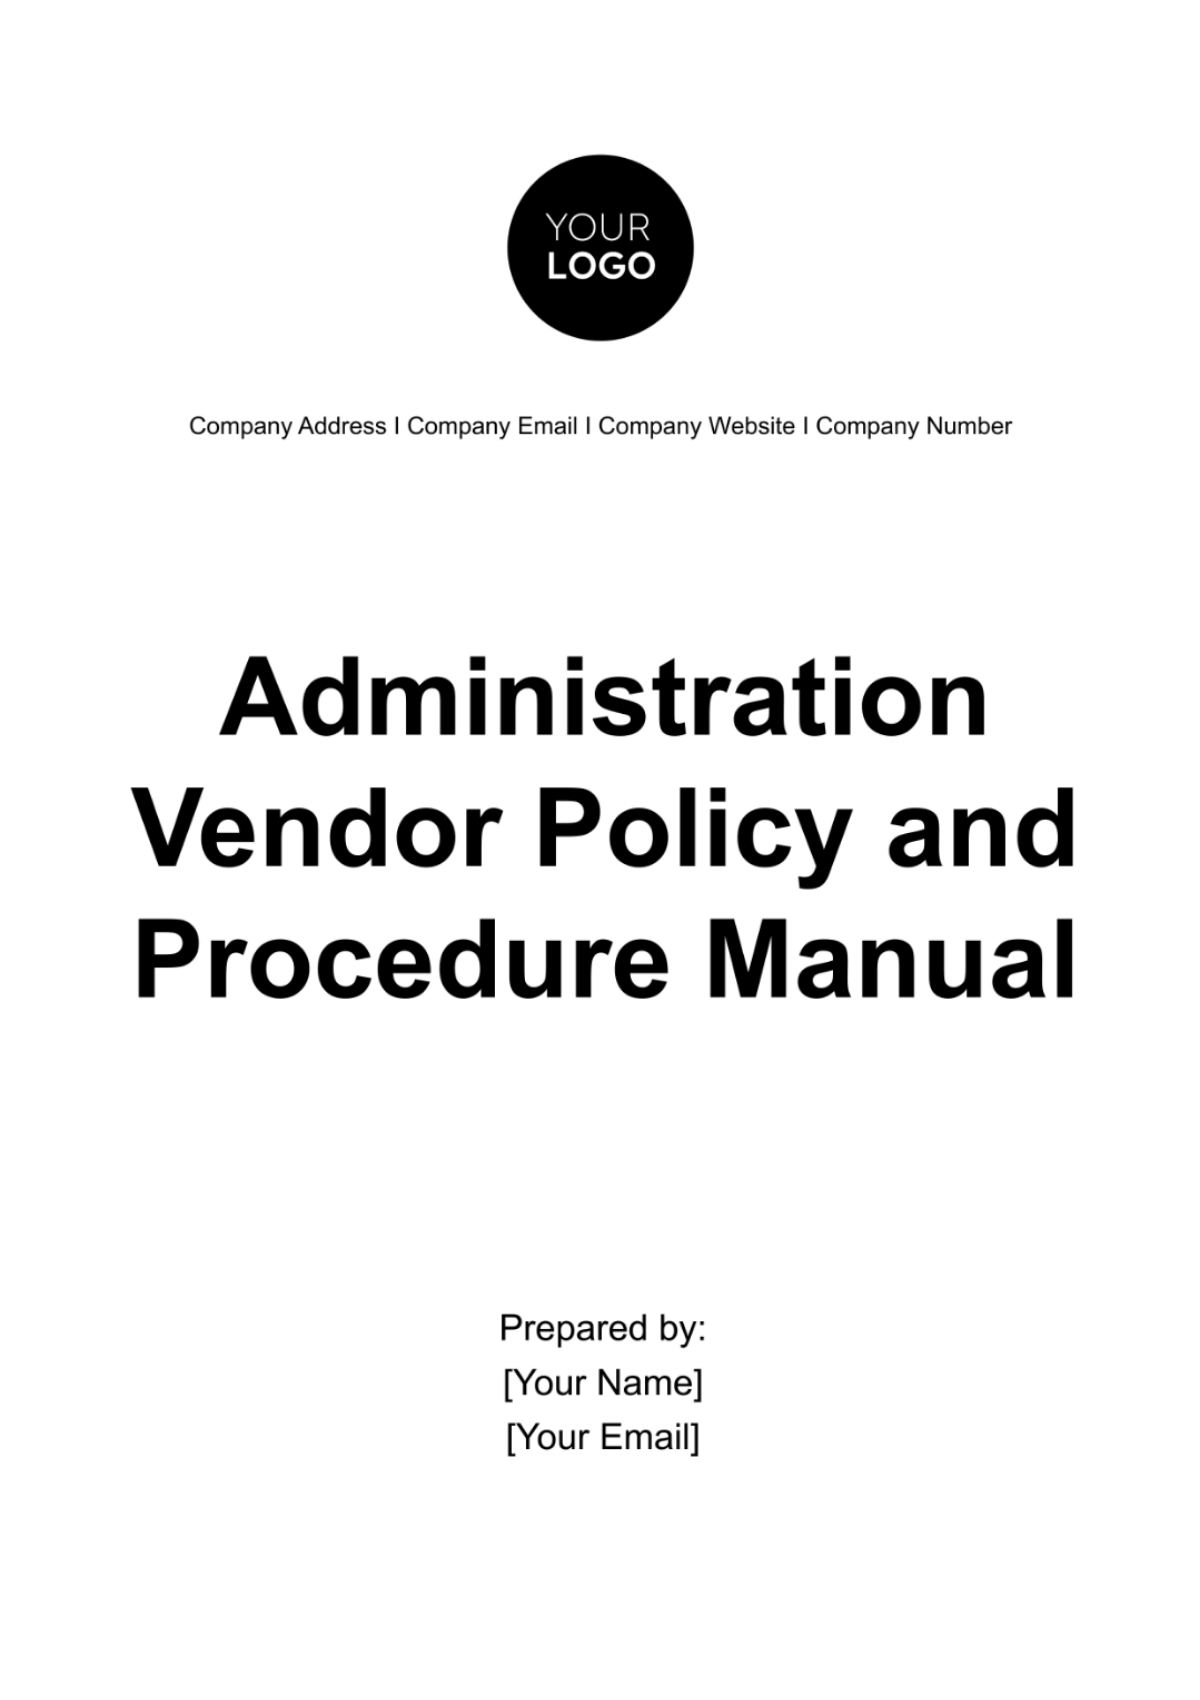 Administration Vendor Policy and Procedure Manual Template